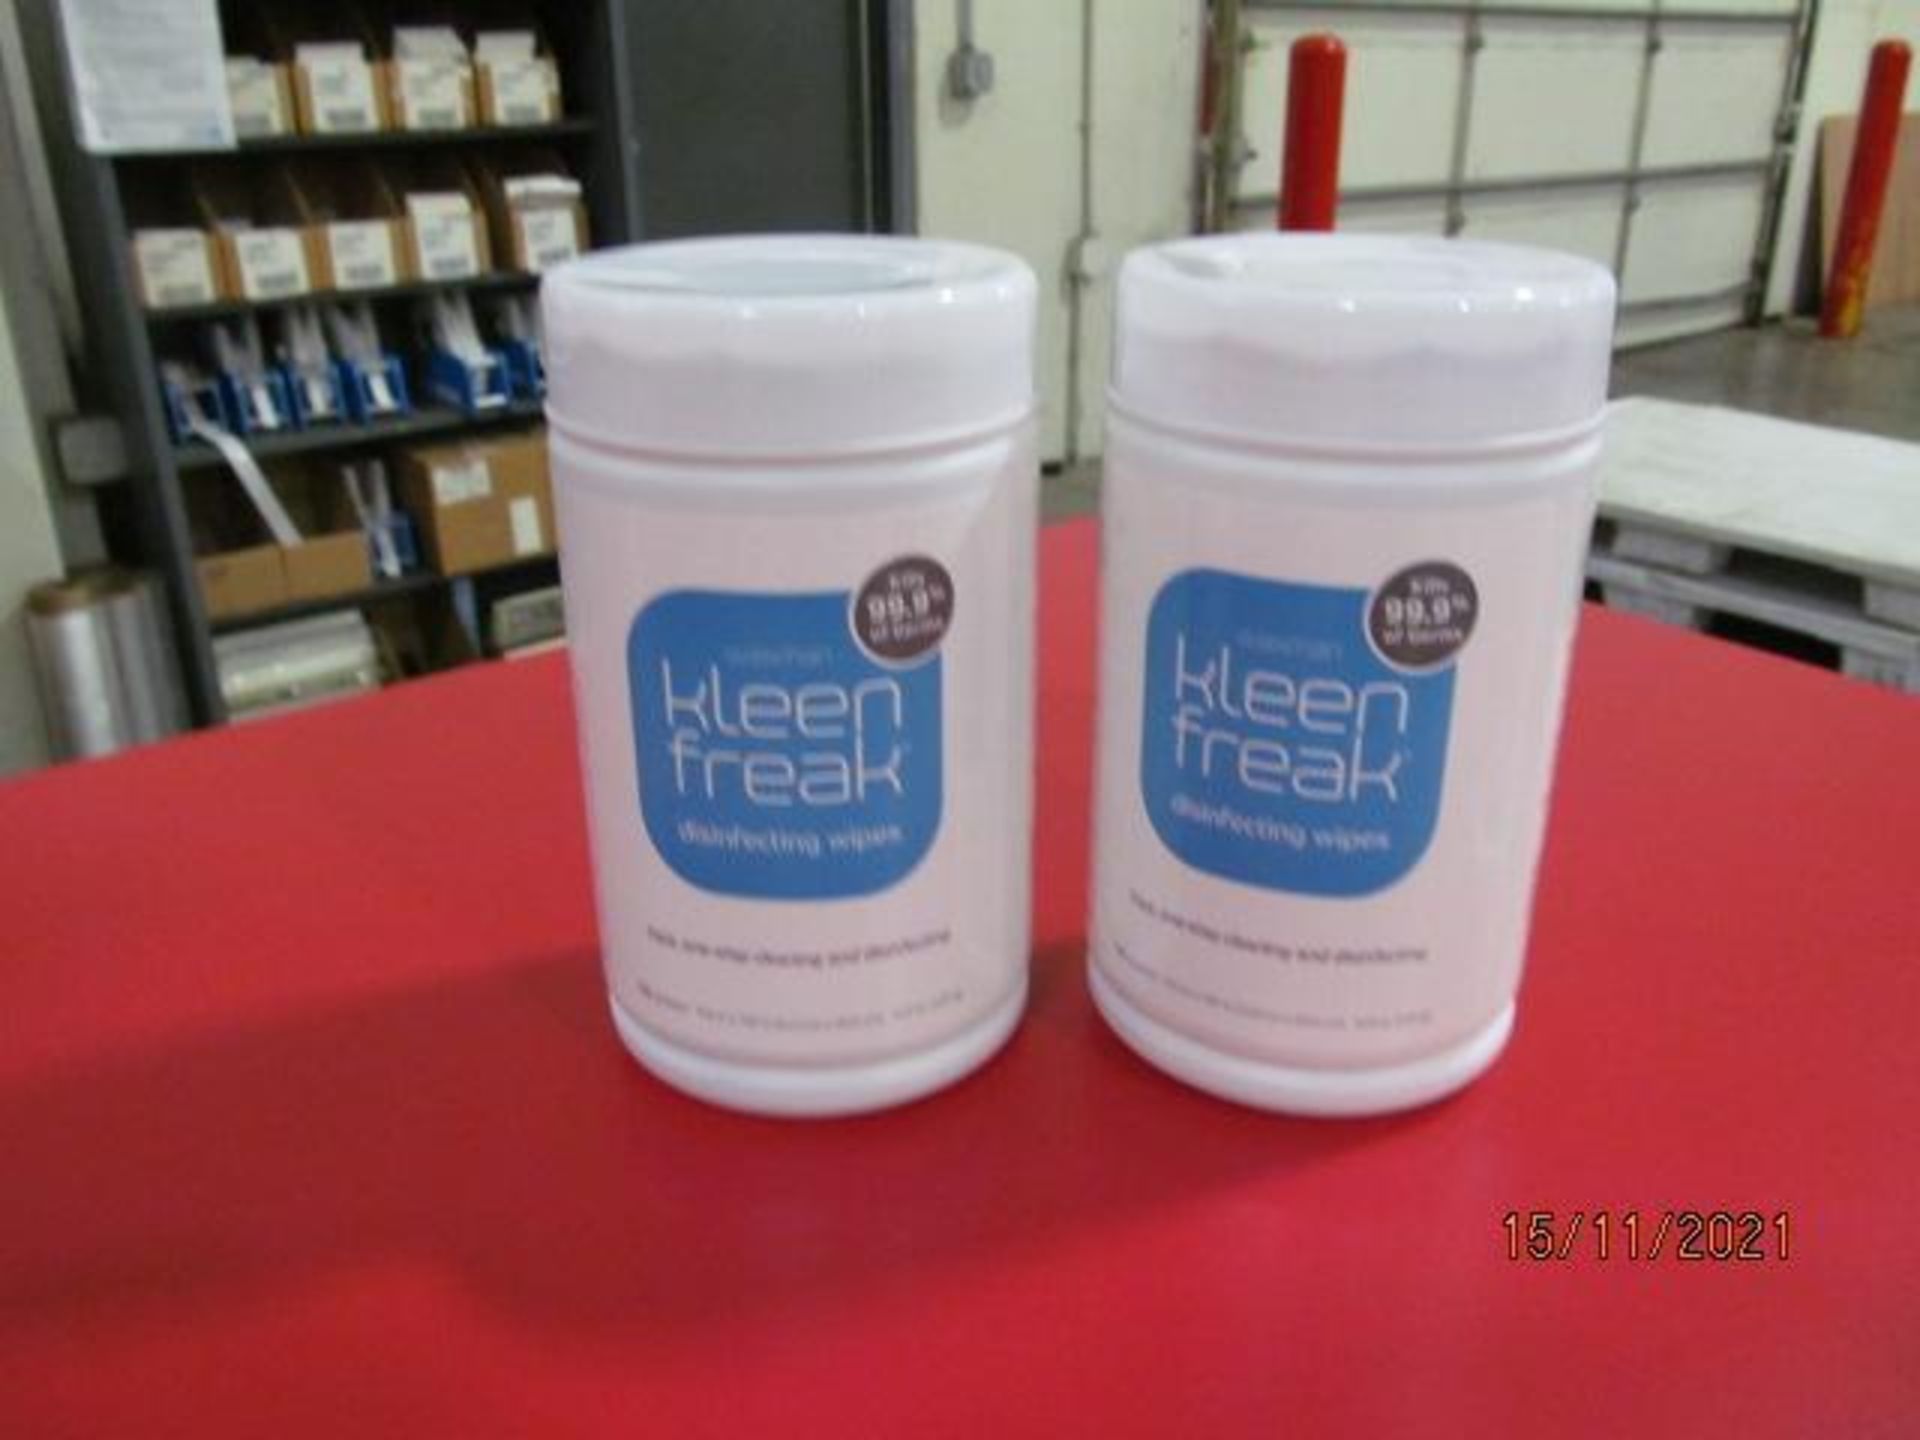 Lot of Waxman Kleen Freak Sanitizing Wipes consisting of 12,960 packages on 20 pallets. Each package - Image 4 of 11